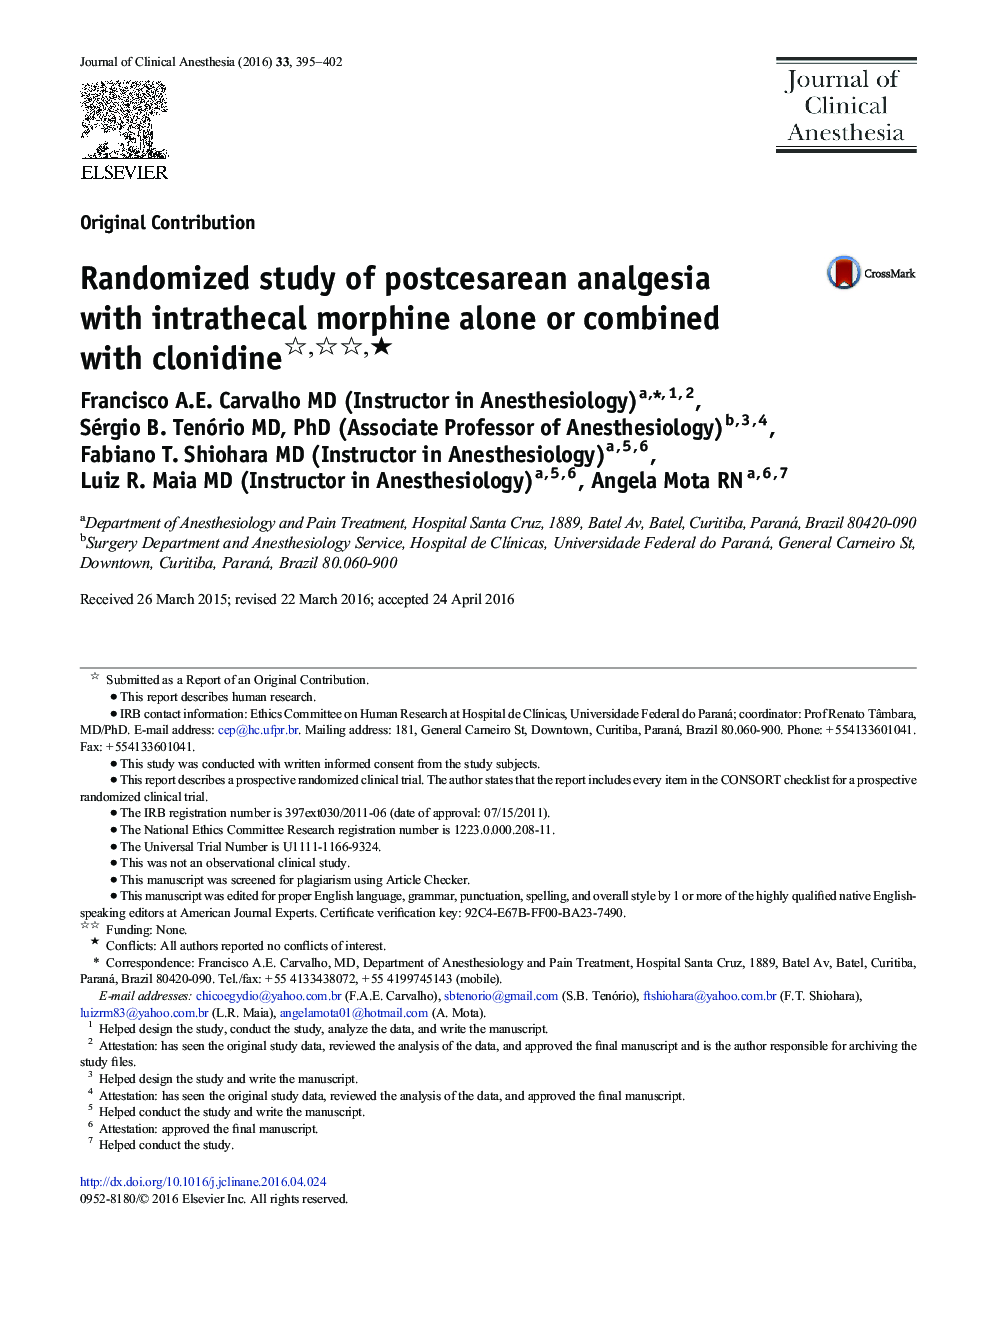 Randomized study of postcesarean analgesia with intrathecal morphine alone or combined with clonidine ★